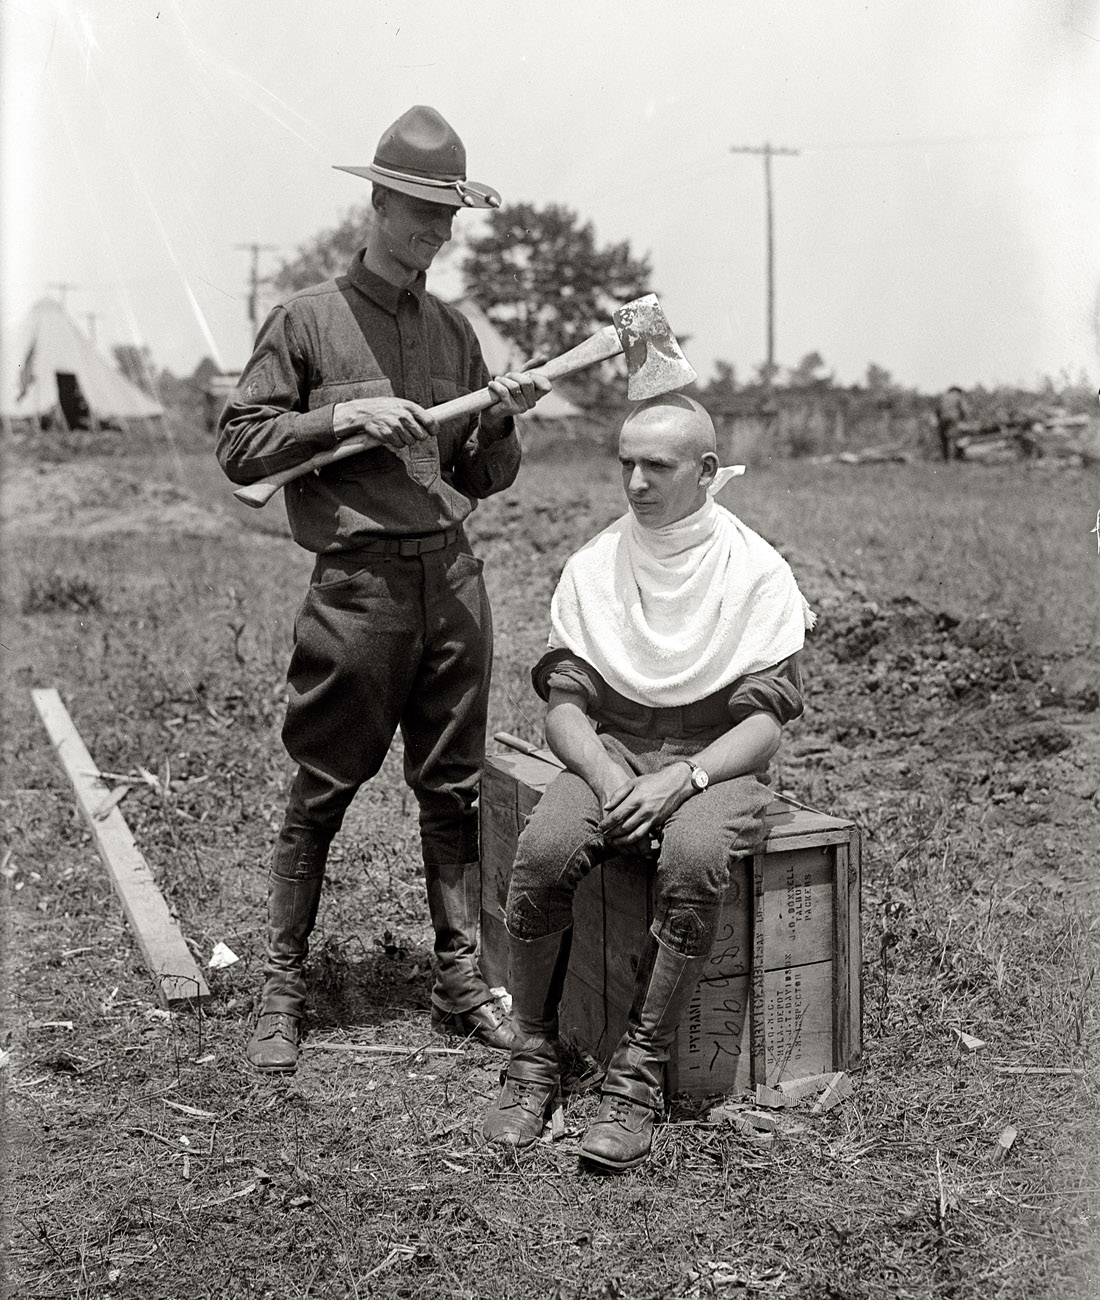 June 21, 1917. Monmouth Park, New Jersey. "Signal Corps barber." 5x7 glass negative, George Grantham Bain Collection. View full size.